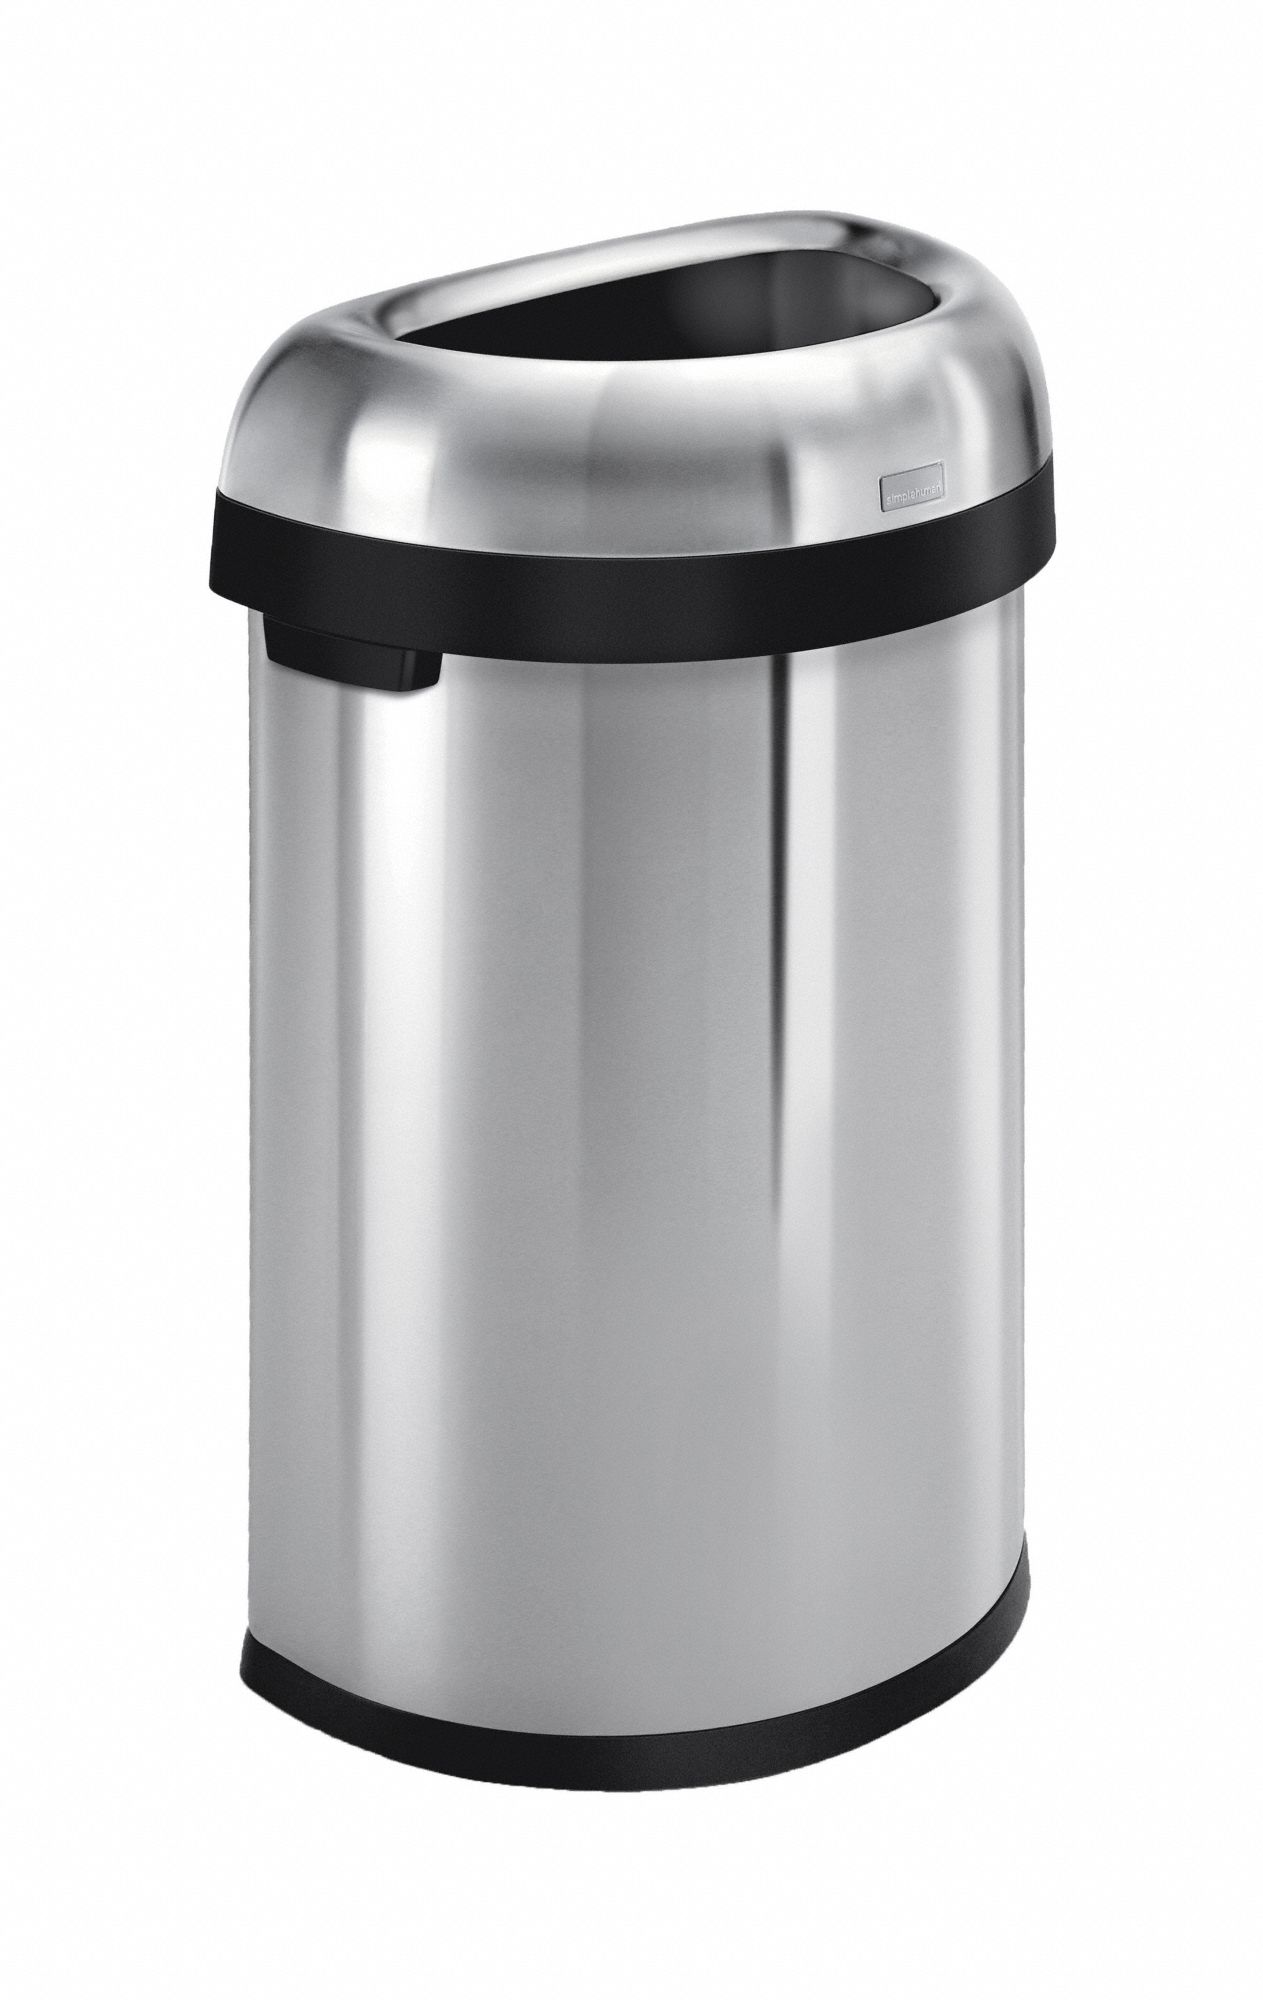 Trash Can: Stainless Steel, Dome Top, Silver, 16 gal Capacity, 18 1/2 in Wd/Dia